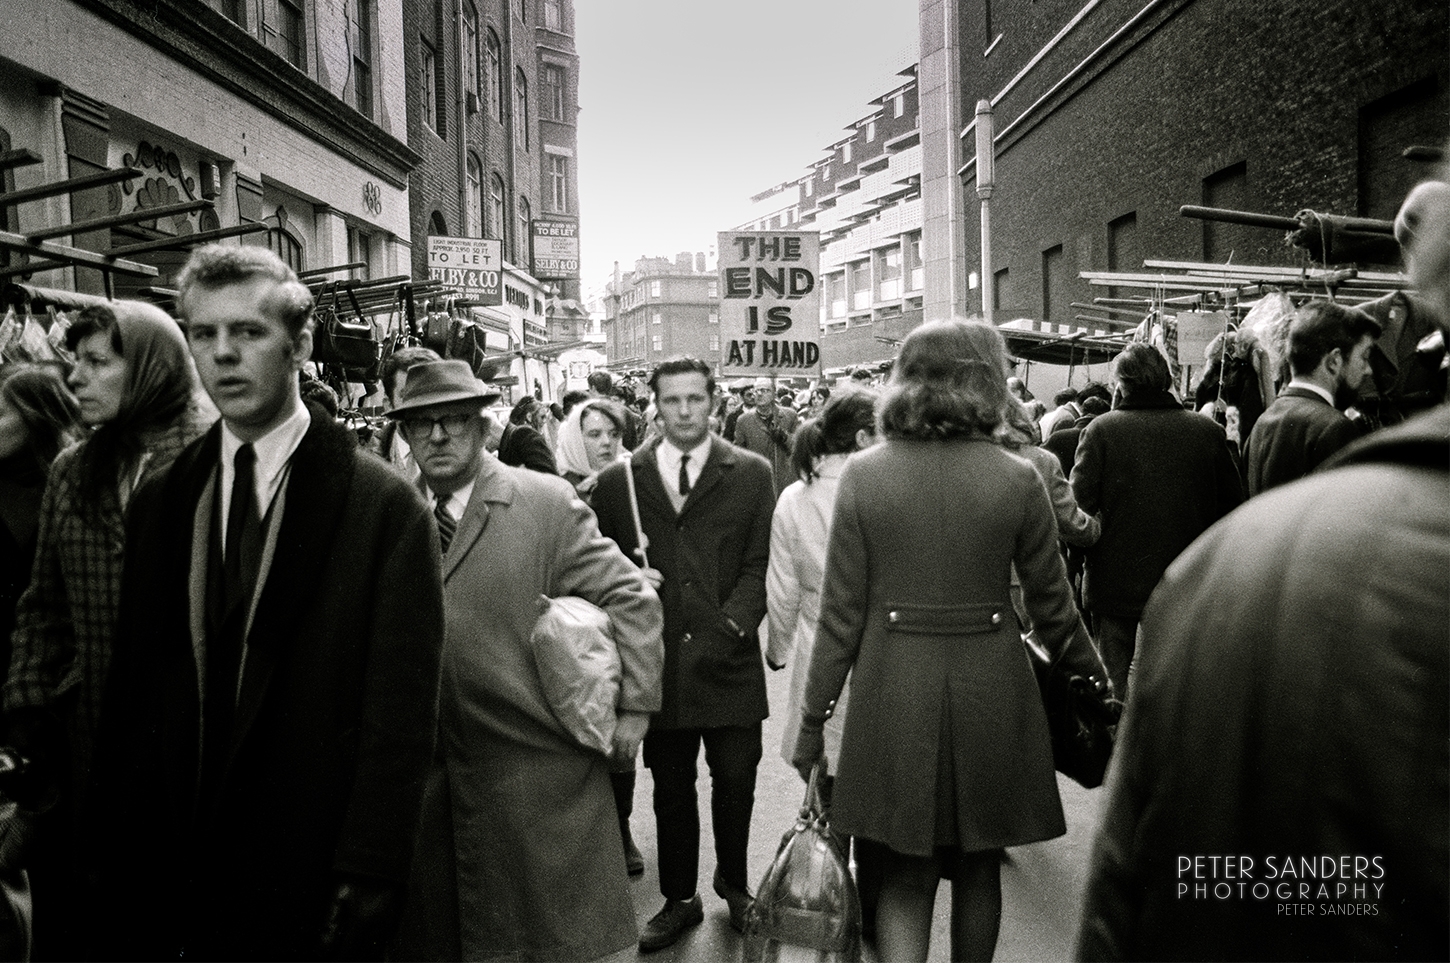 Peter Sander Photos - a crowd of people walking down a street